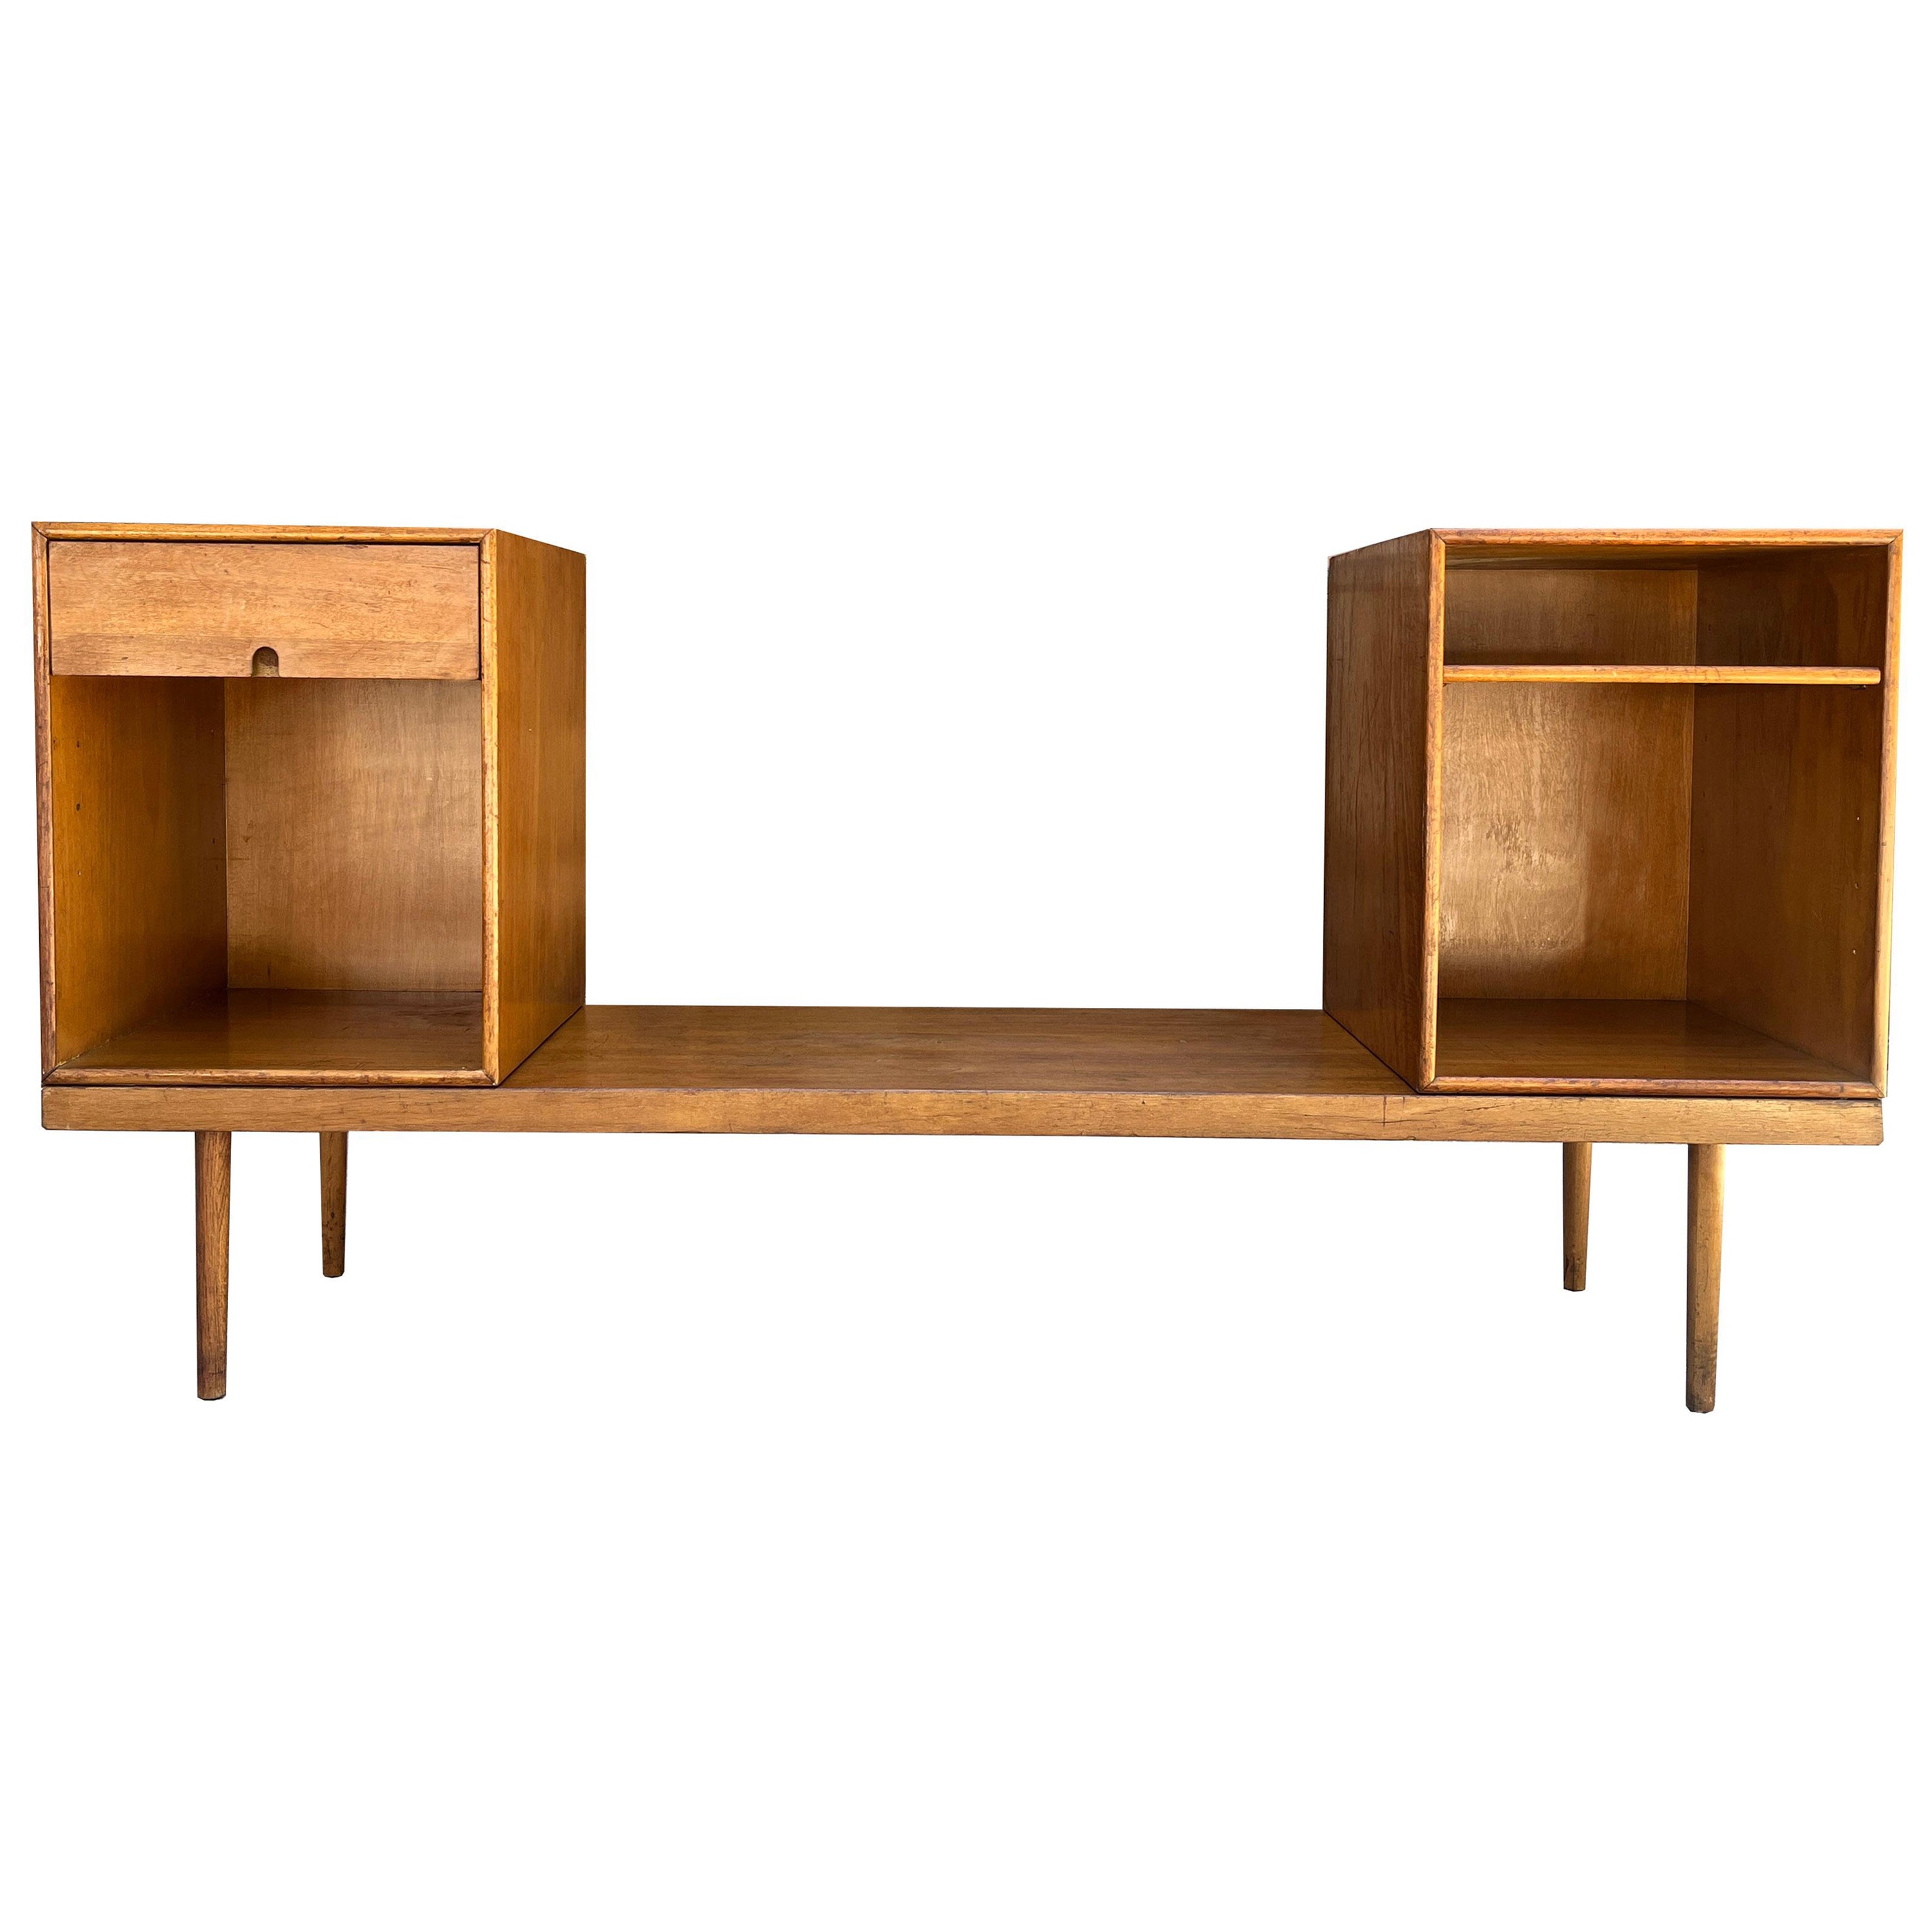 Rare and Important Midcentury Bench/Cabinets- Eames and Saarinen -Organic Design